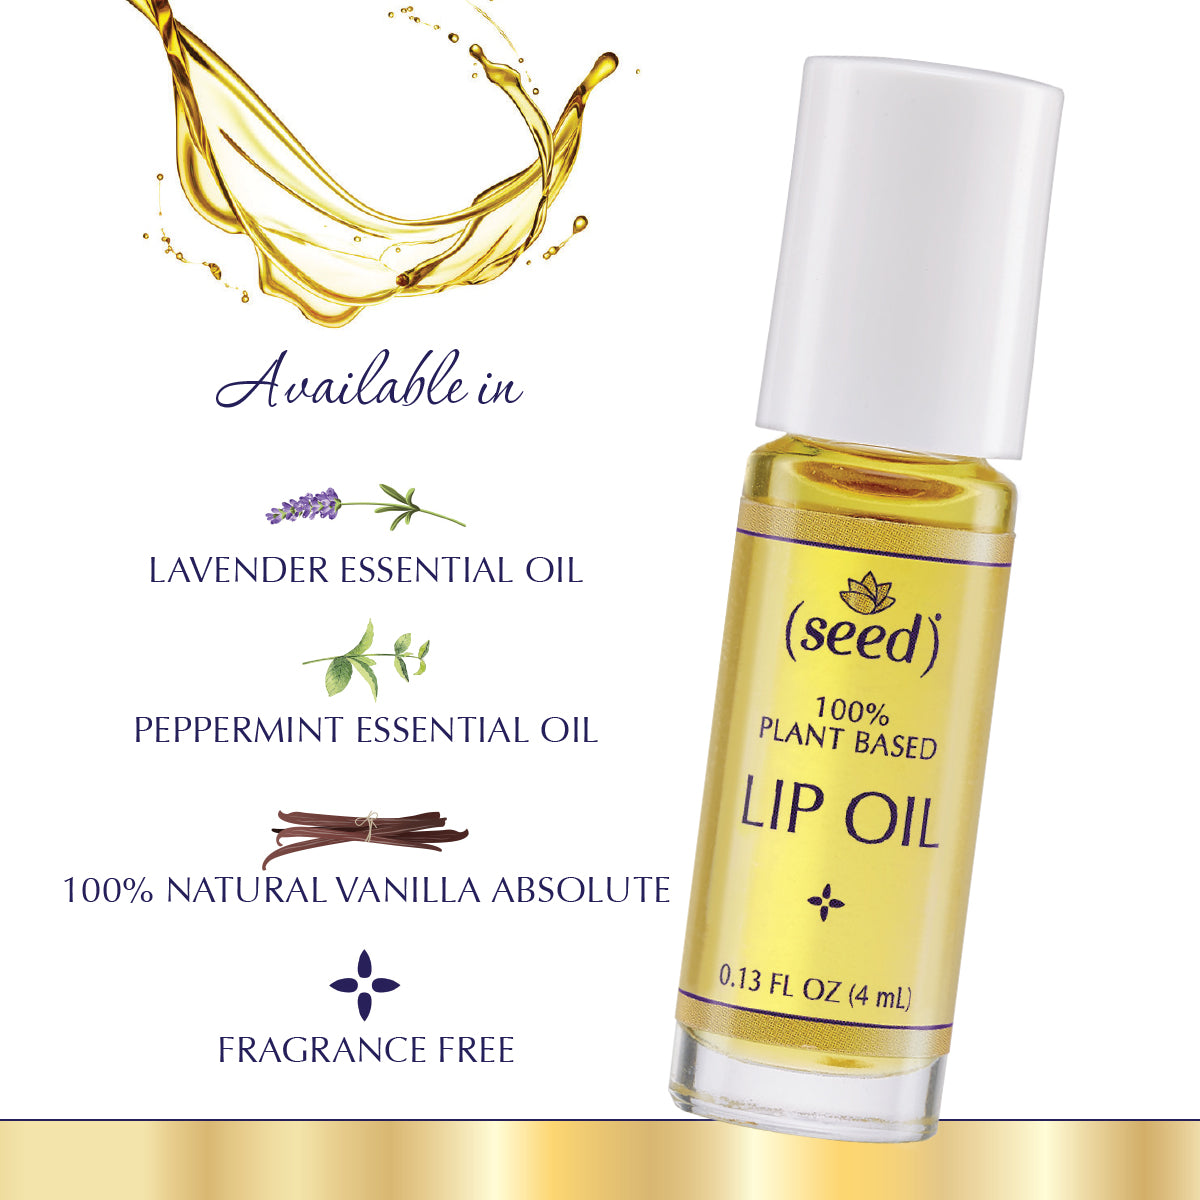 Seed Lip Oil available in Fragrance Free, Lavender, Peppermint, and Vanilla